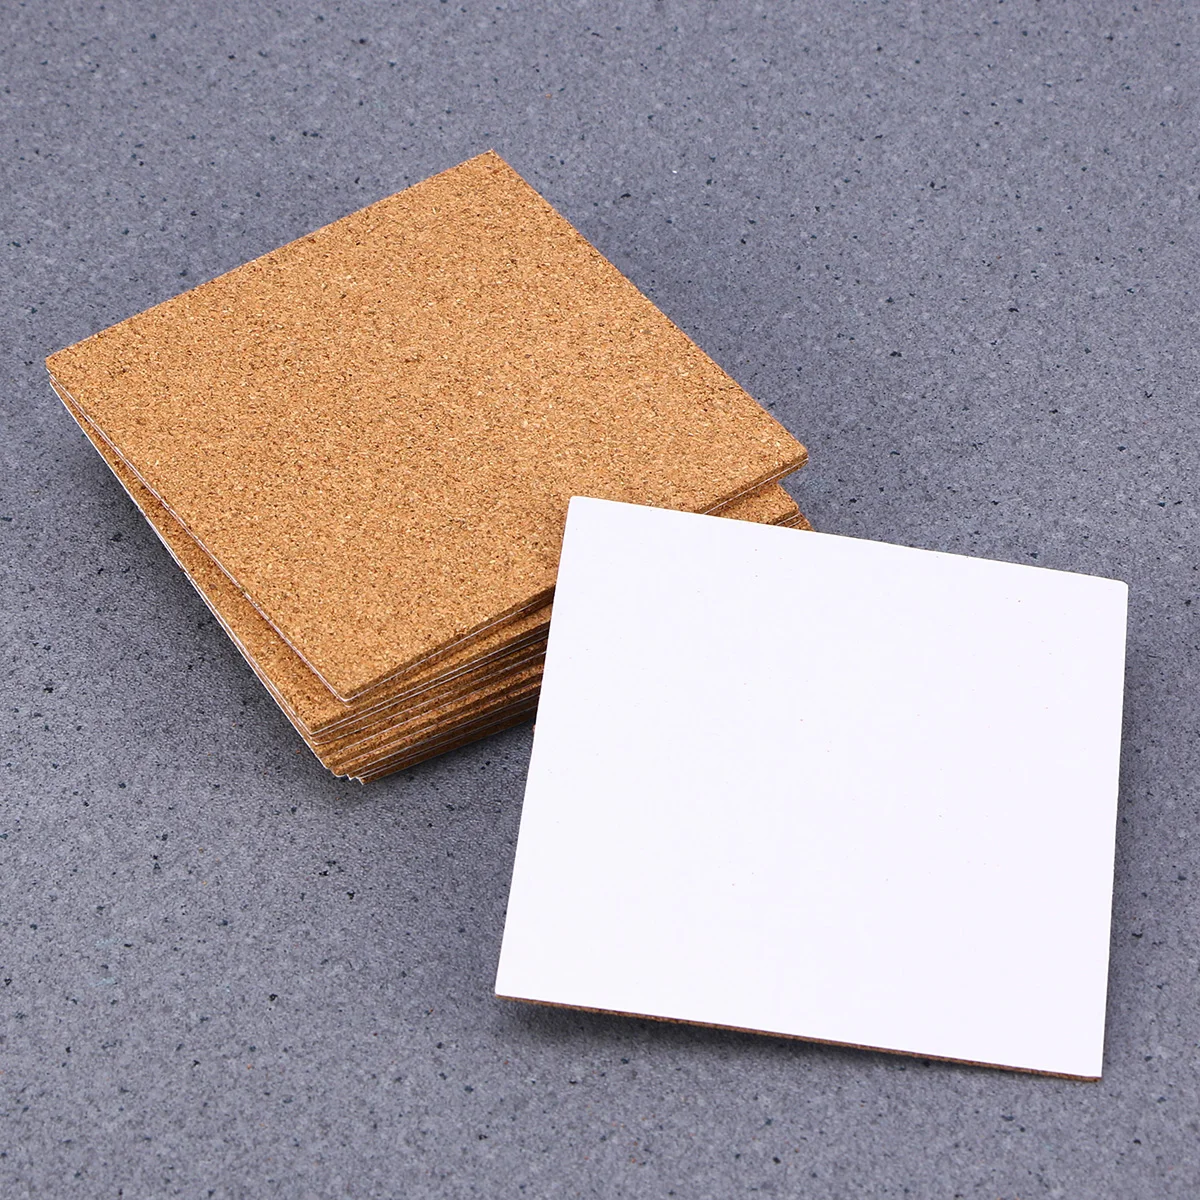 

36 PCS Cork Coasters Coaster Pad Cup Mat Pad Washer Cork Spacer Square Coasters Wooden Cork Cup Coasters Corkboard Mats Backing